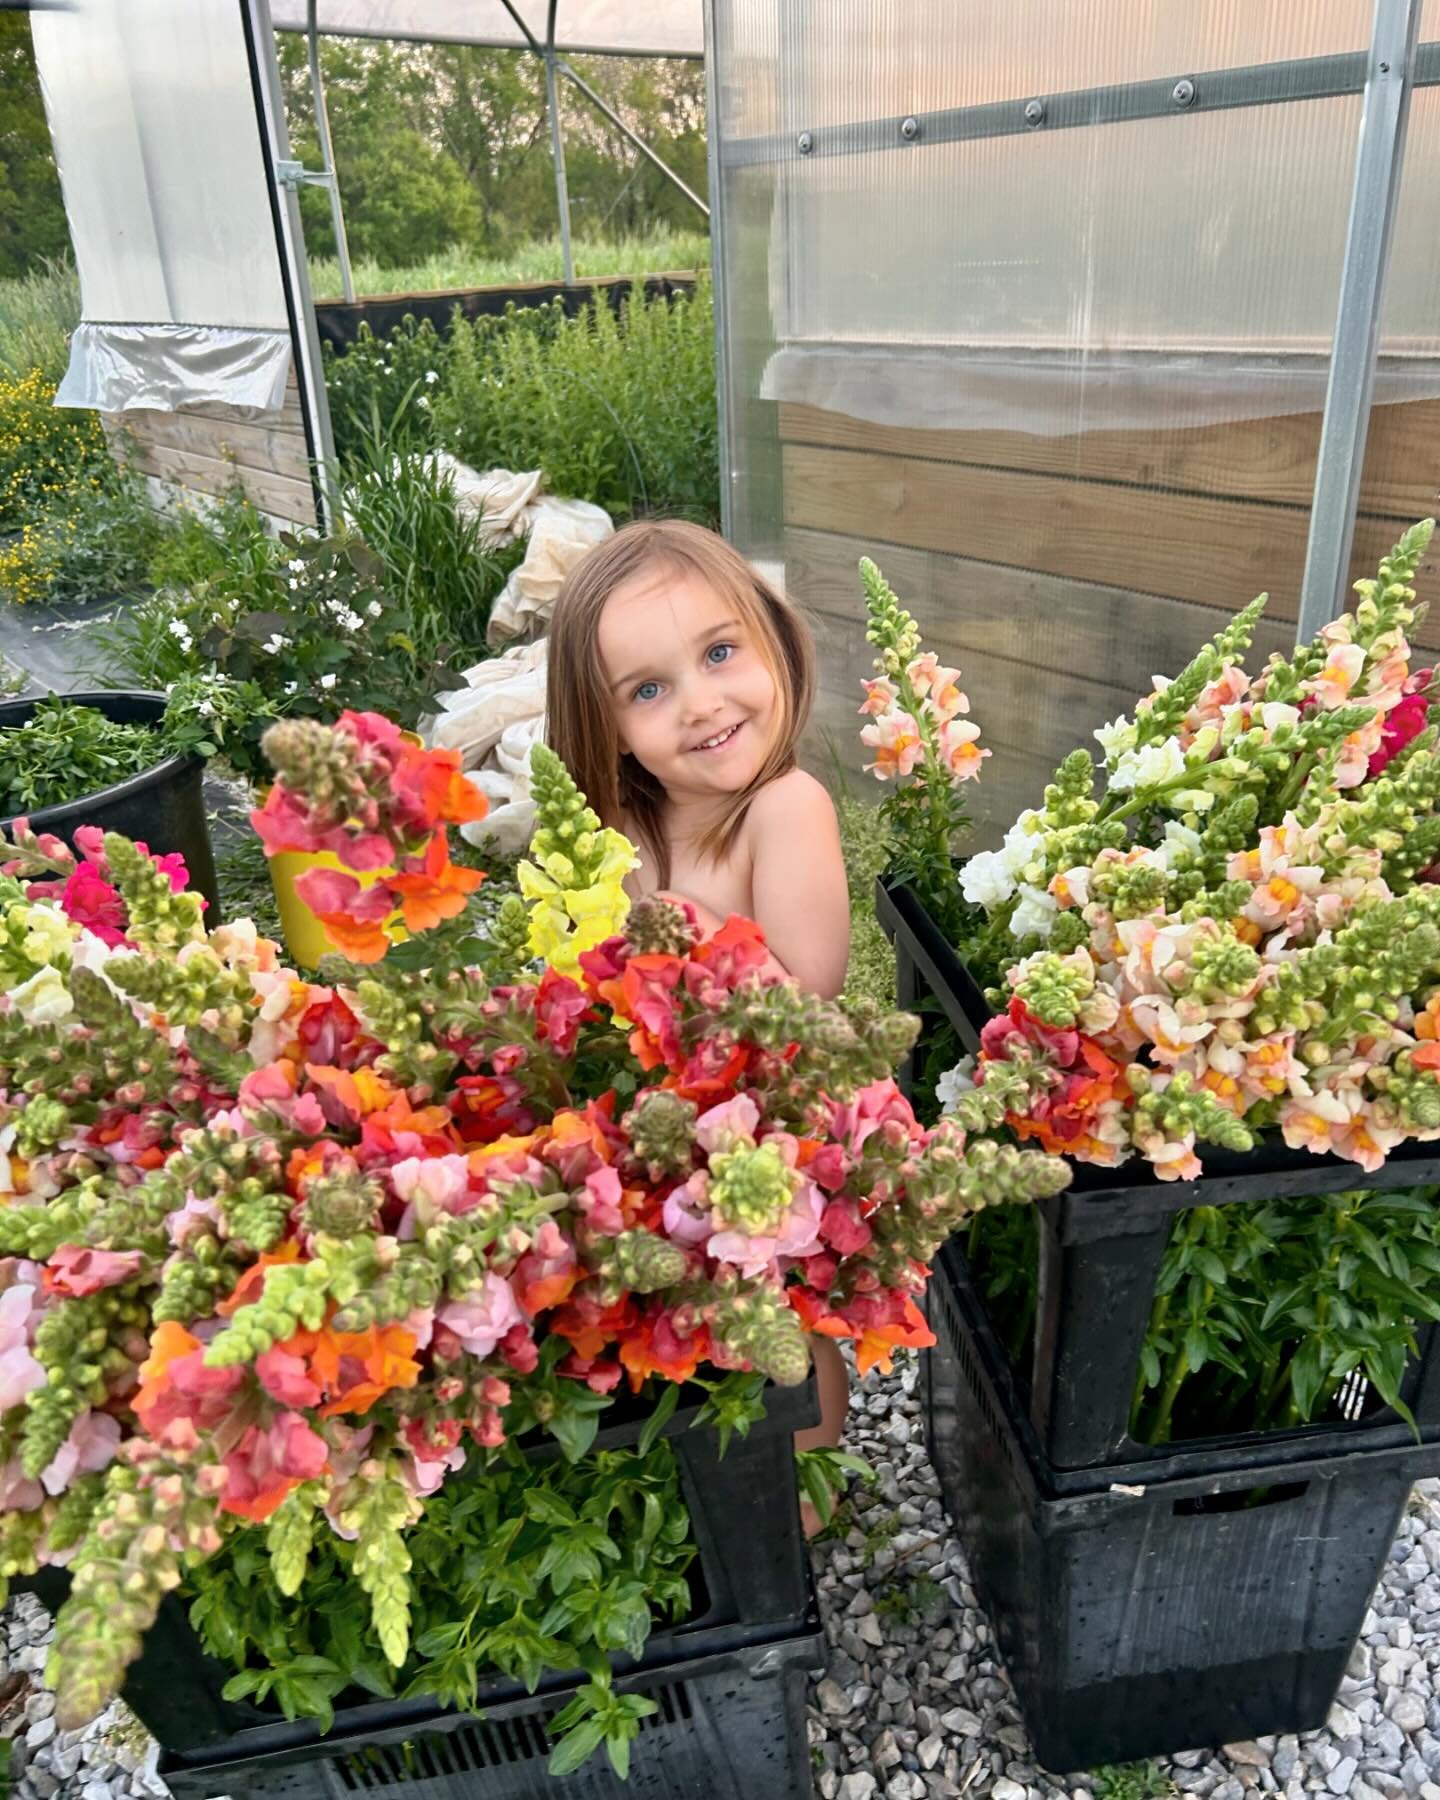 The dirt child and Ern are back from vacation and the usual chaos has resumed. Cheers to farm kids, family and flowers! 
*****
#farmkids #flowers #snapdragon #spring #knowyourfarmer #grownnotflown #harvest